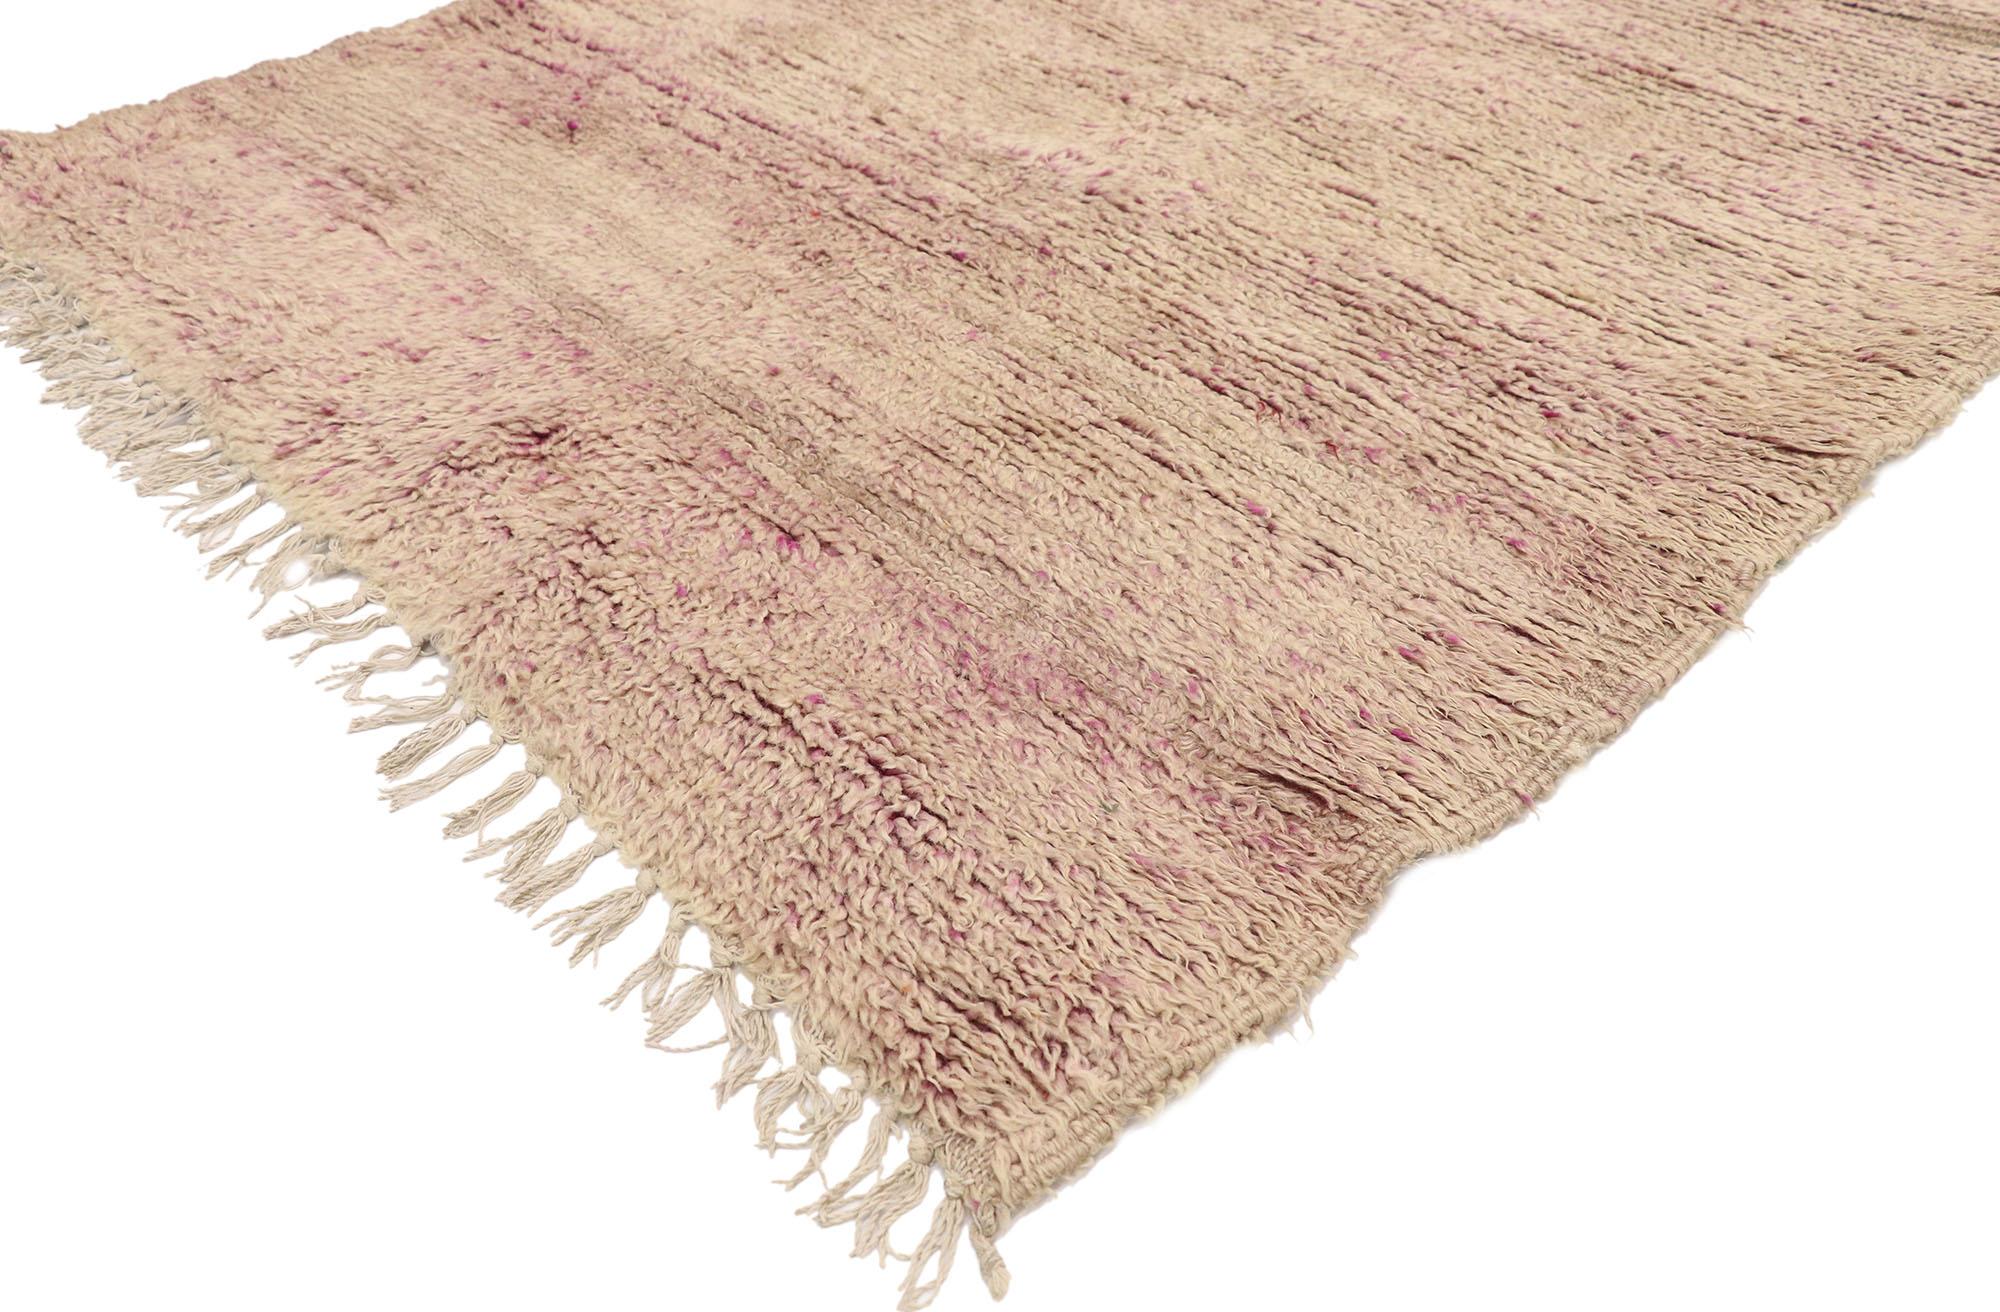 20939, vintage Berber Moroccan rug, shag hallway runner with Bohemian. This hand knotted wool vintage Berber Moroccan rug features mauve hues with beige striations running selvage to selvage blending seamlessly from one to the next. Though